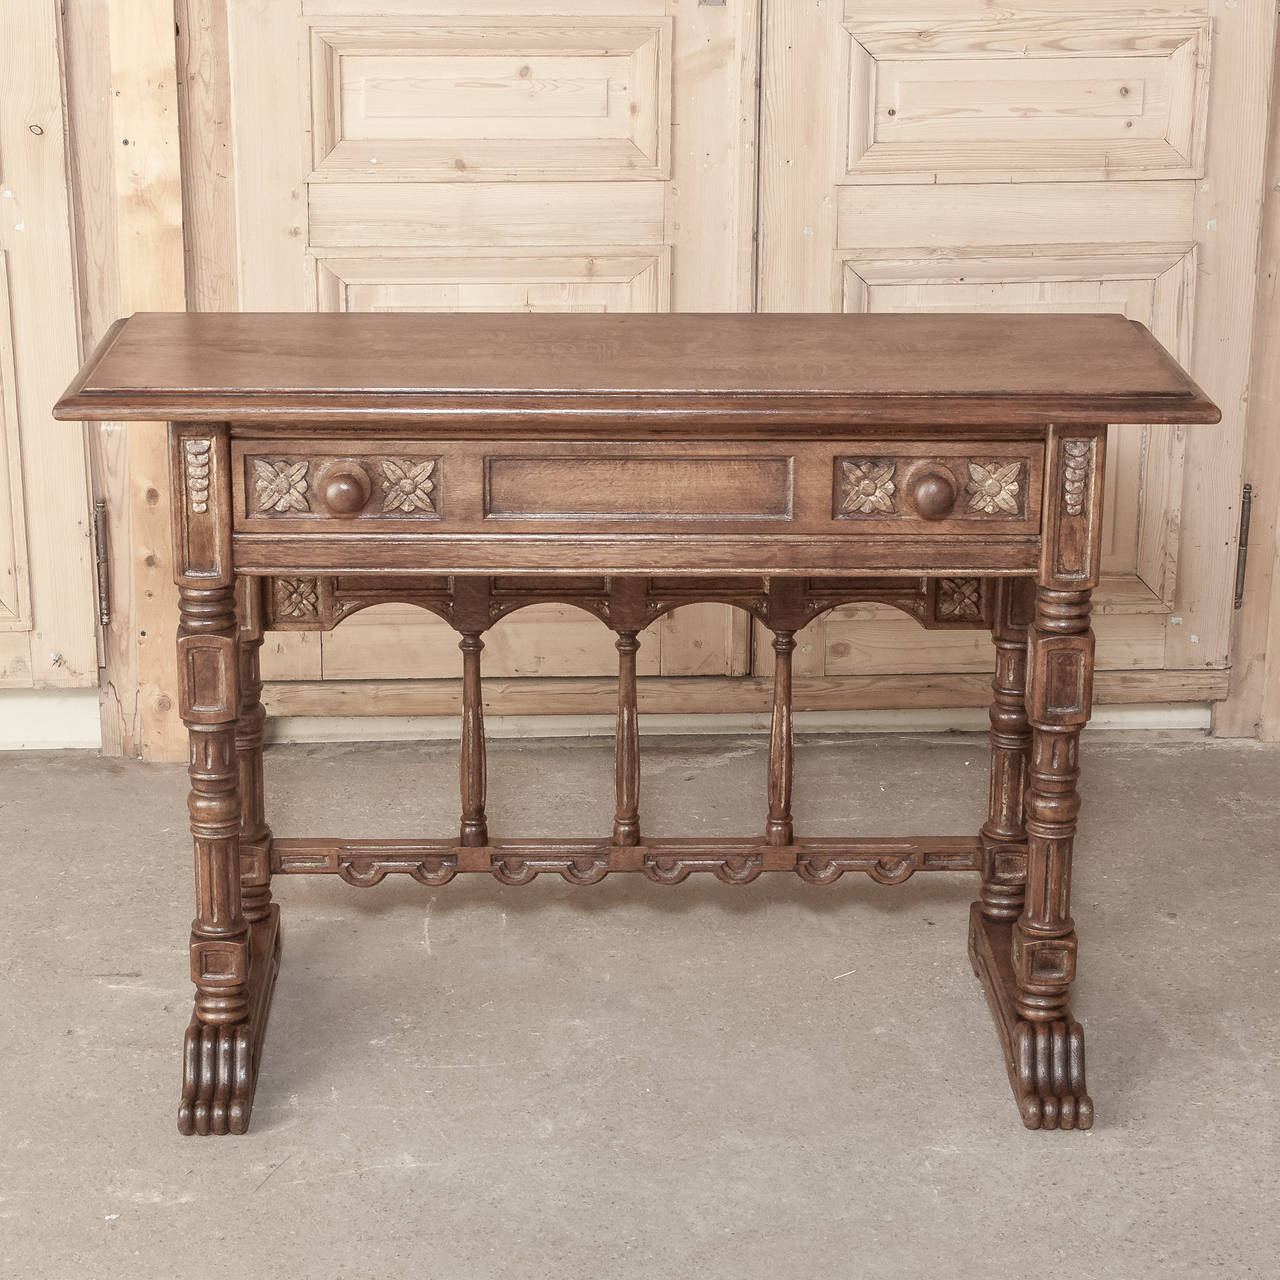 This Rustic Writing/Sofa Table is shallow enough to work behind the sofa, in a hallway, or that special niche!  Clever architecture and a couple of drawers make it visually appealing as well as functional!
Measures 32H x 46.5W x 16D
Circa 1920s